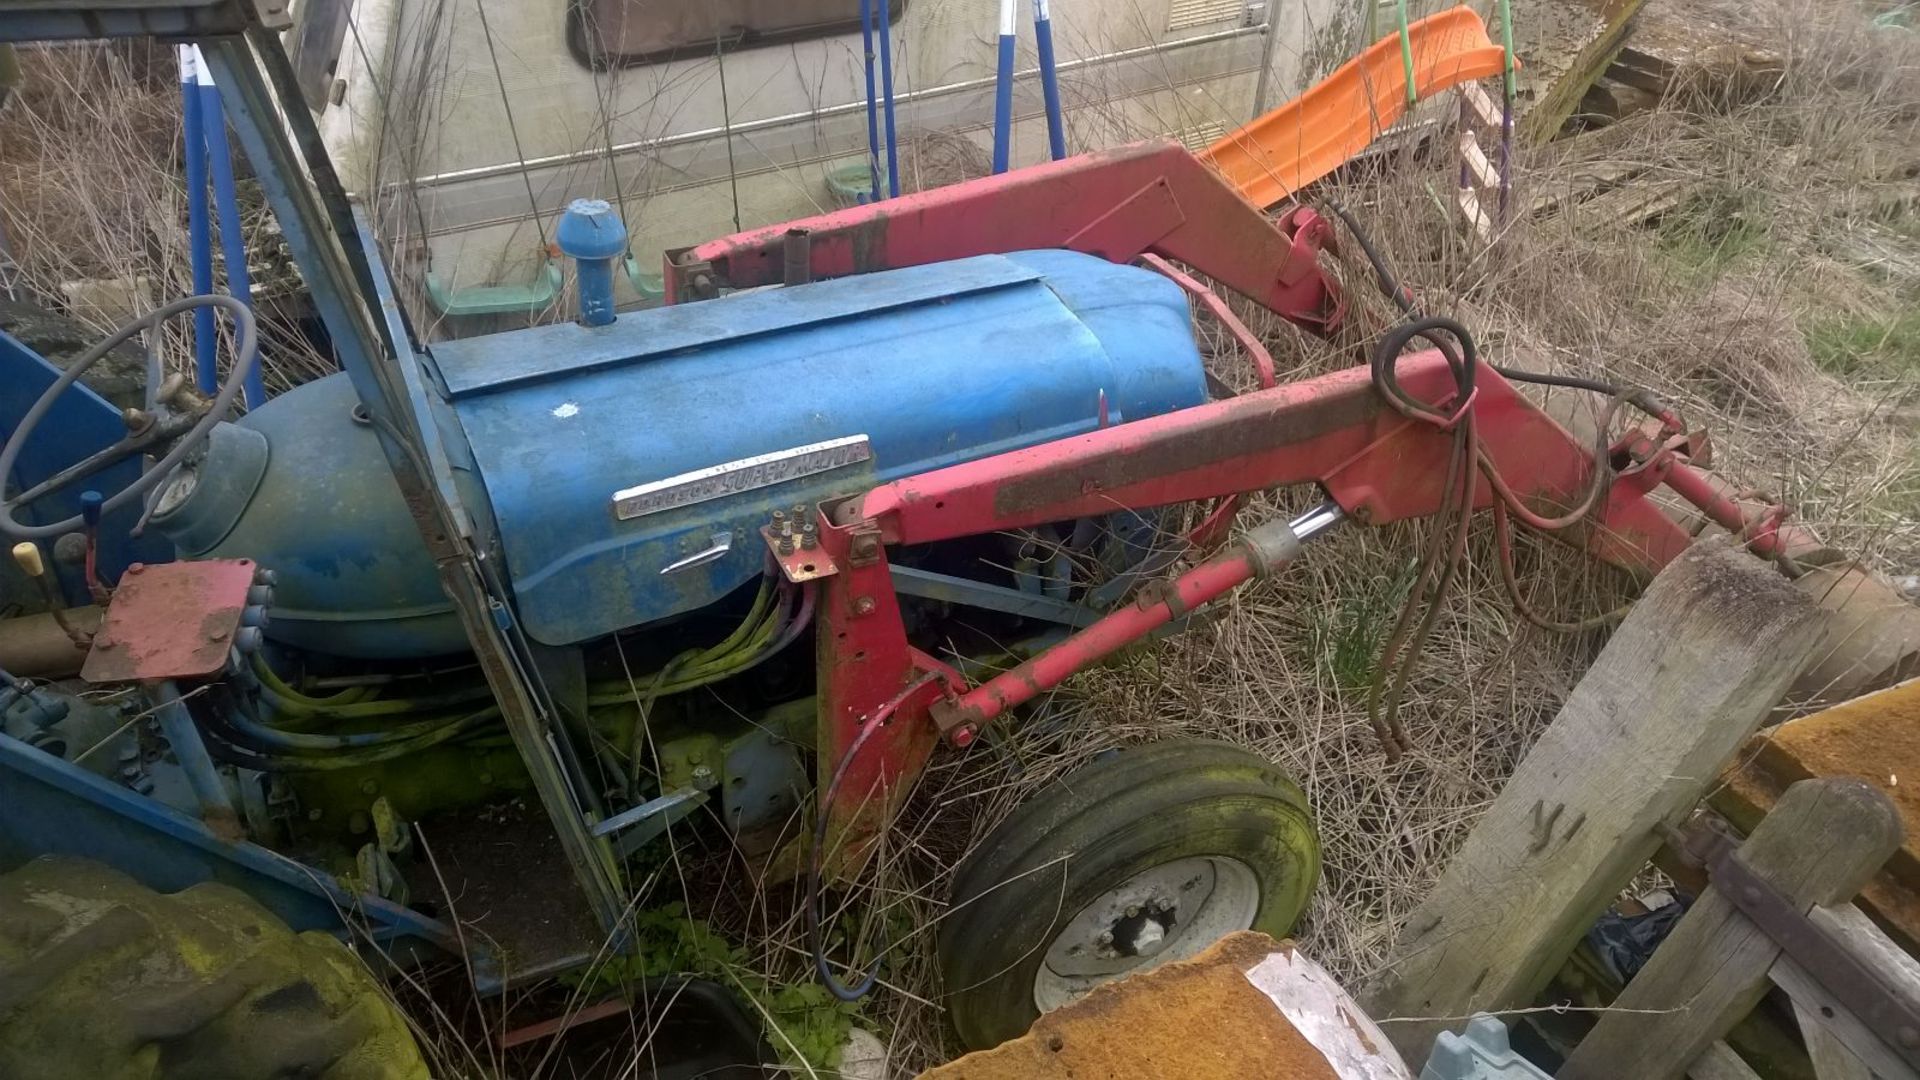 FORDSON  SUPER MAJOR c/w POWER LOADER   WE HAVENT HEARD IT RUNNING YET BUT WE ARE INTENDING TO GET - Image 13 of 20